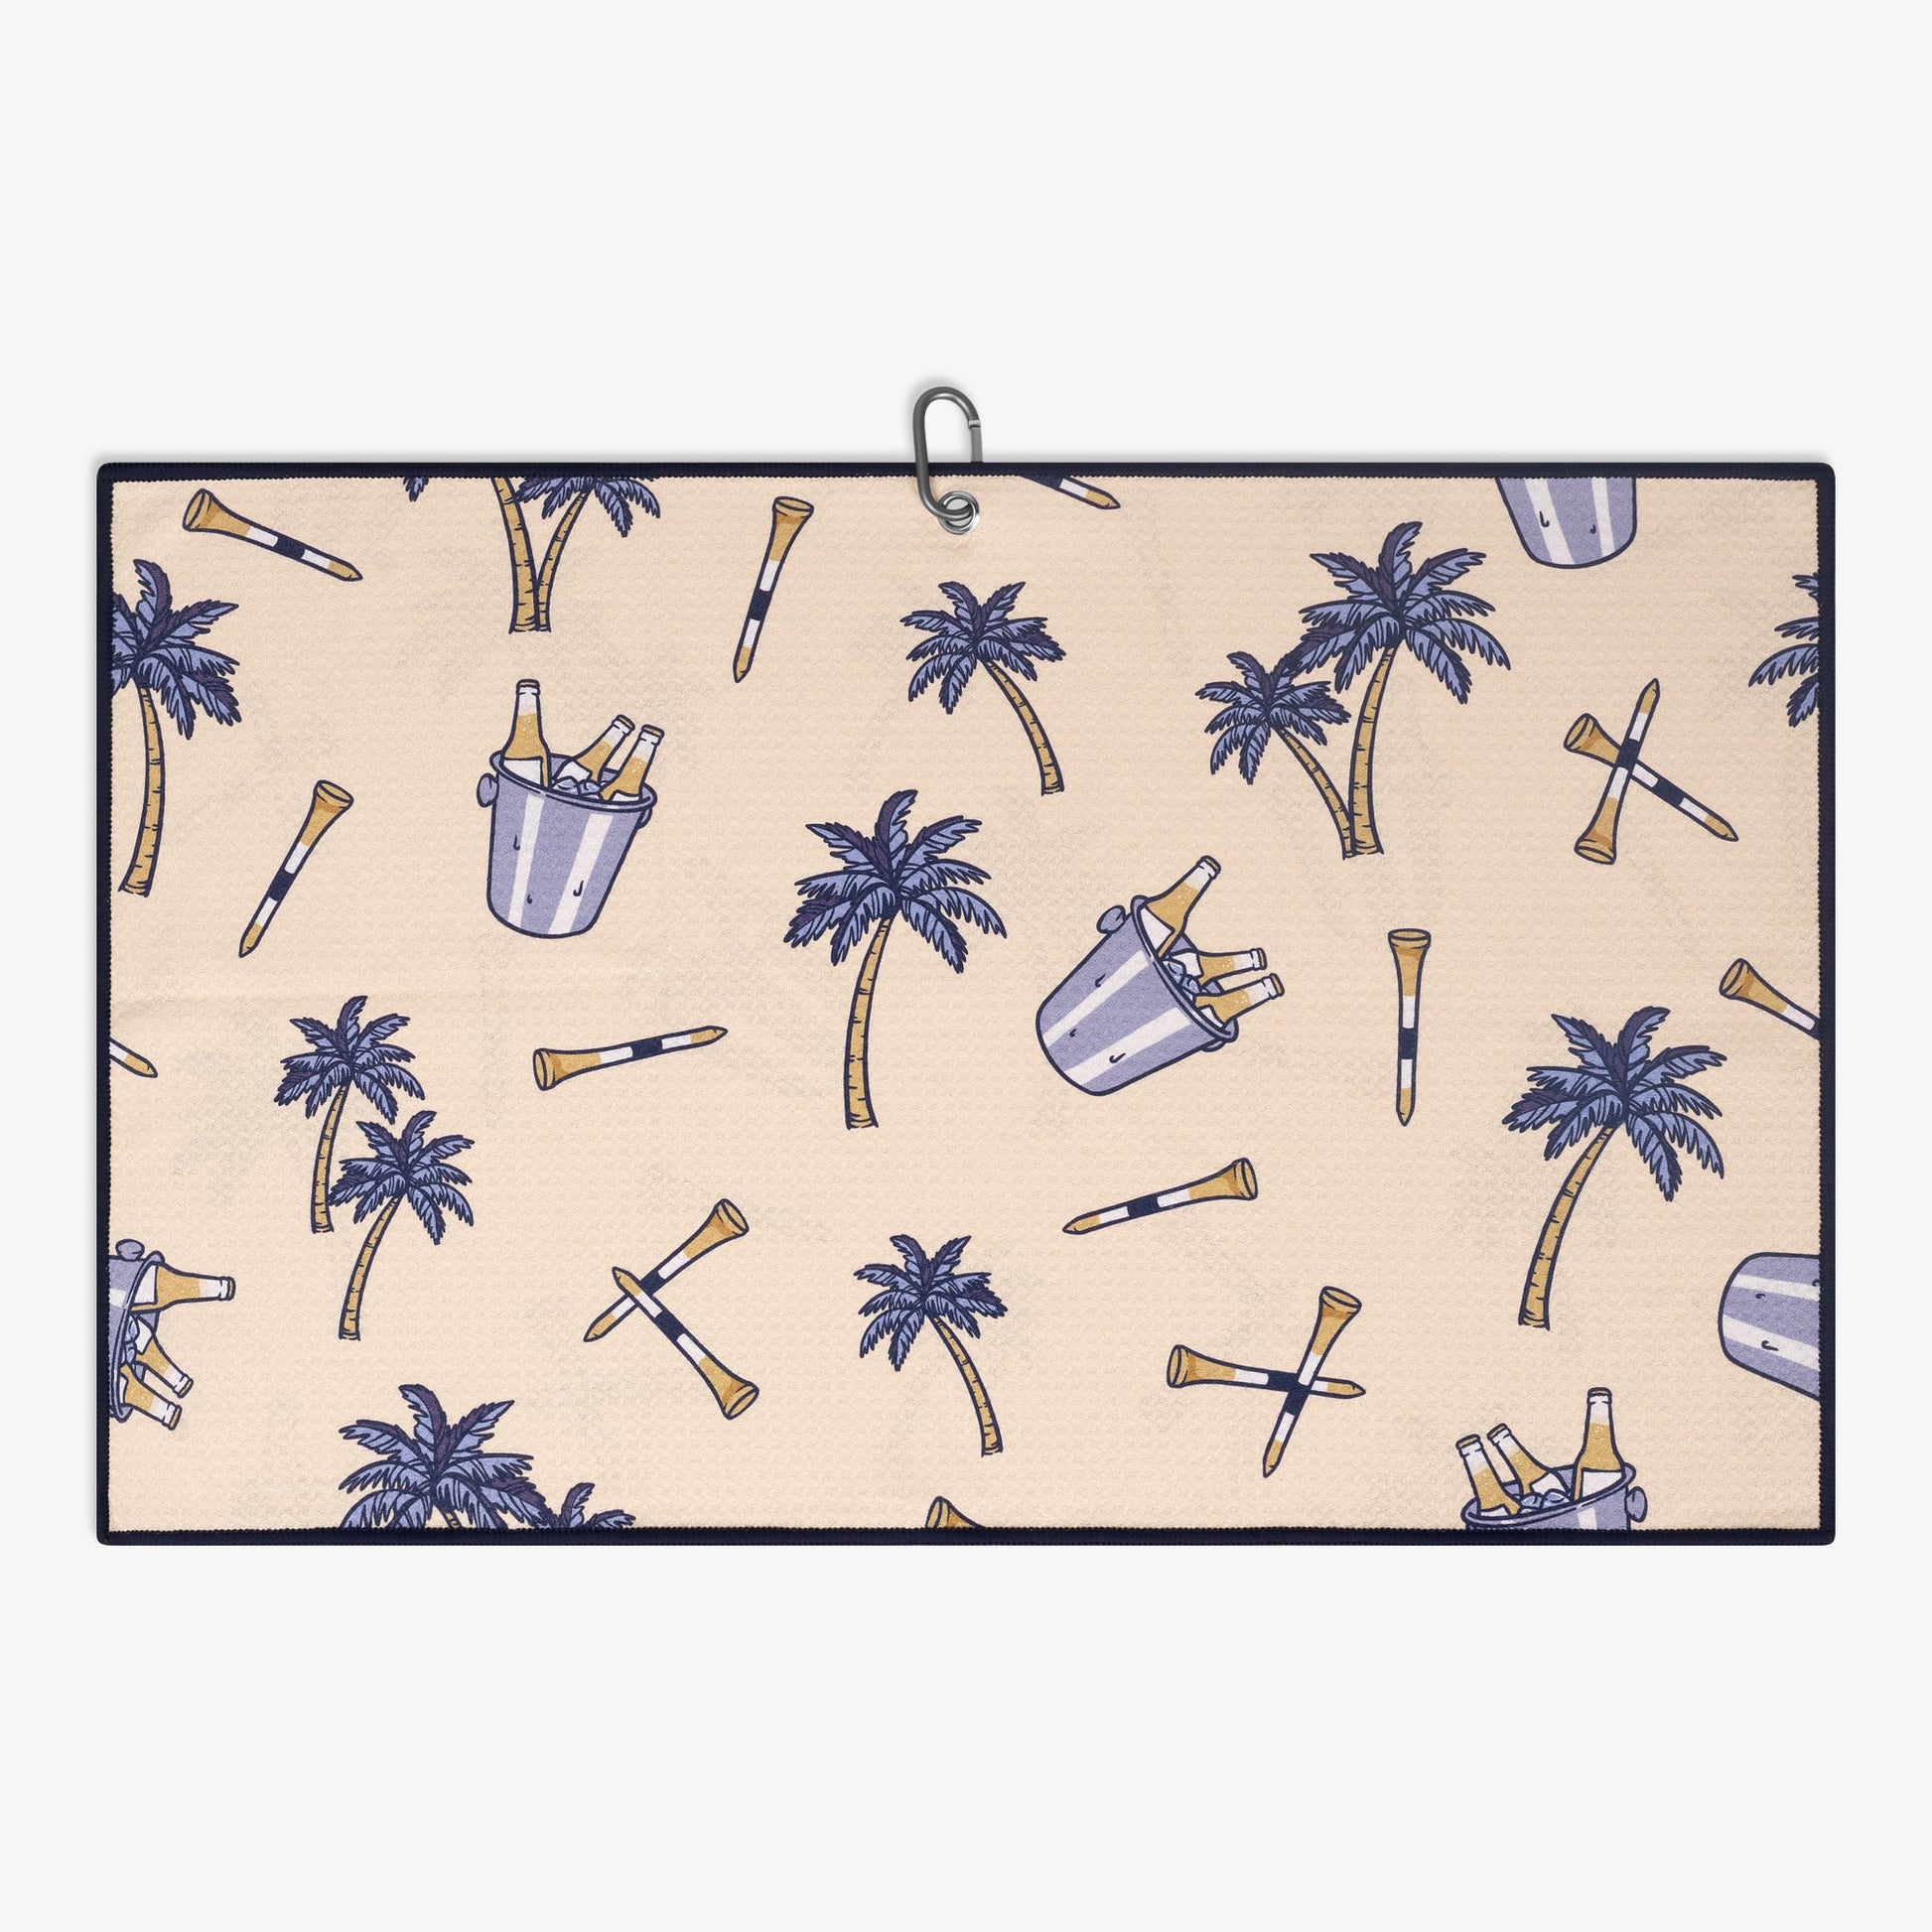 Golf towel with beers and palm tree prints